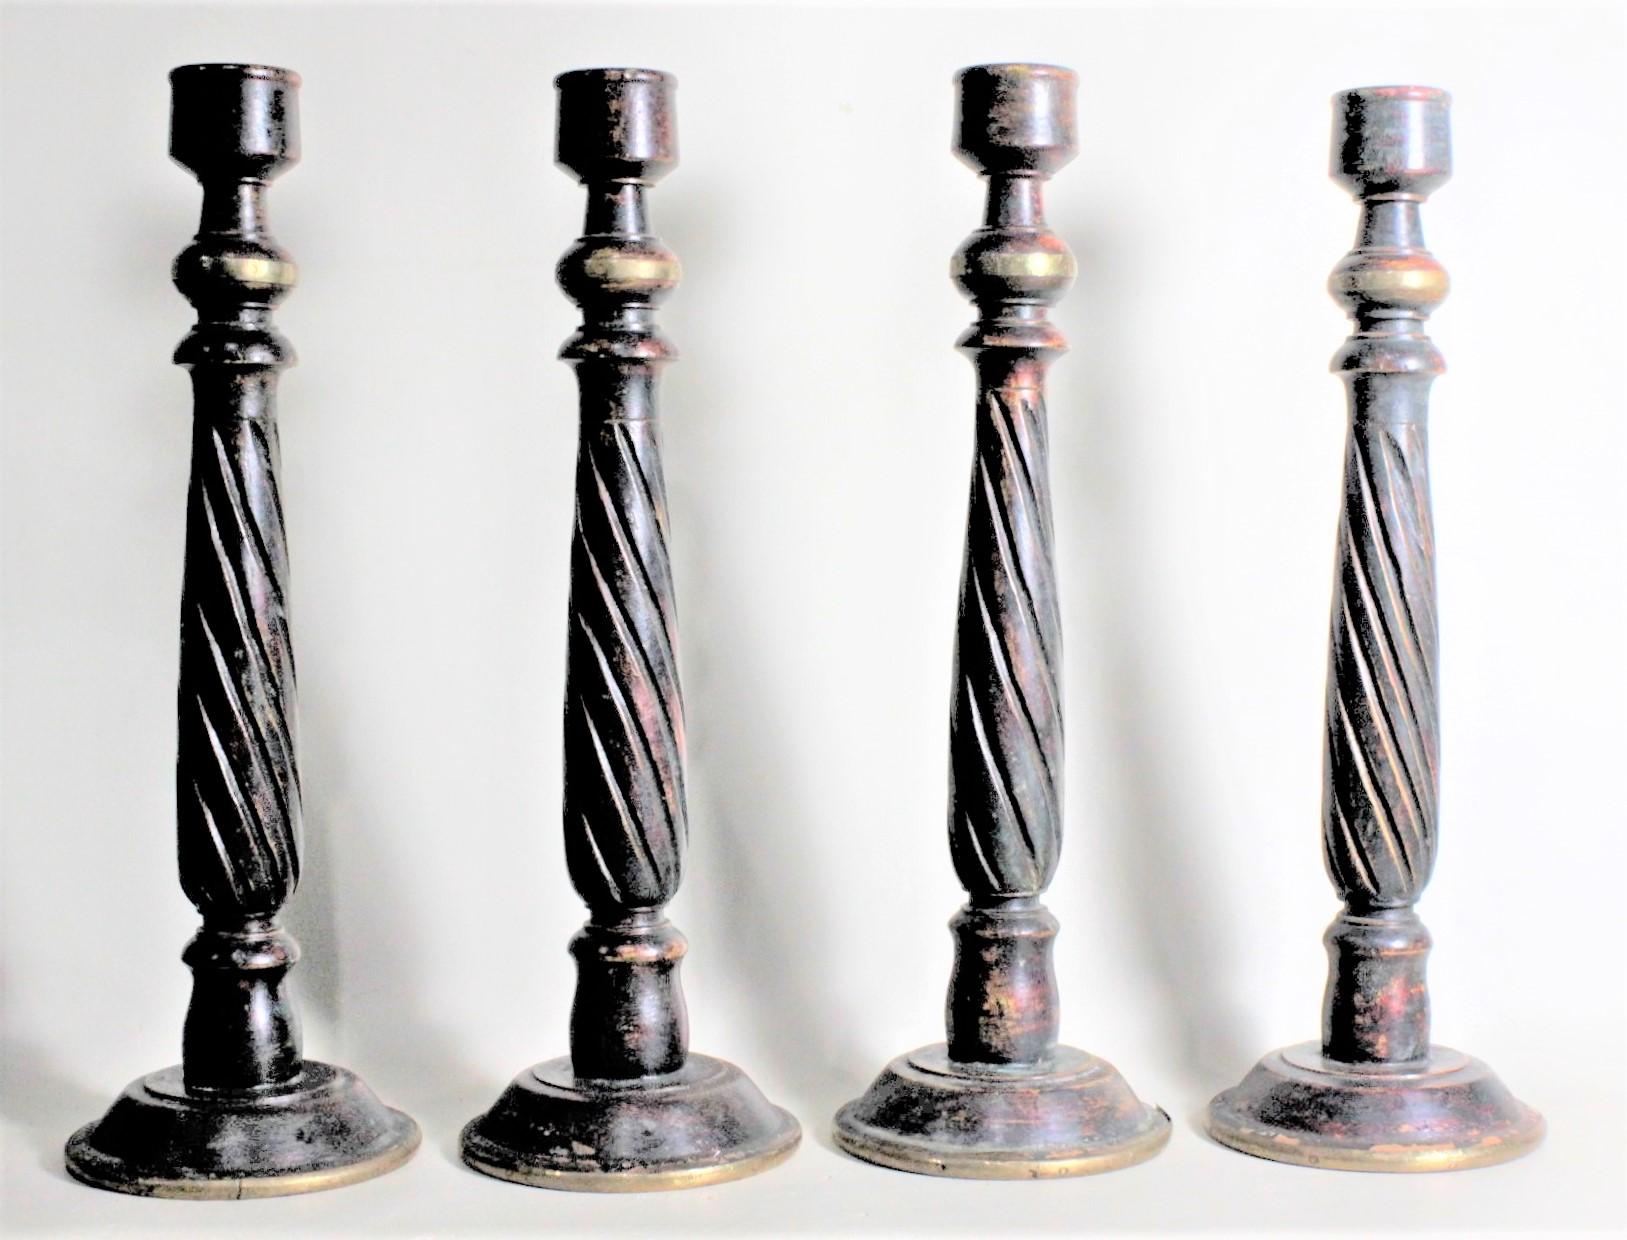 This set of four carved and painted 'cricket stick' styled candlesticks are unsigned but presumed to have been made in Eastern Europe in circa 1930 in a folk art style. The sticks are nicely turned and have carved spiral accents down the body of the